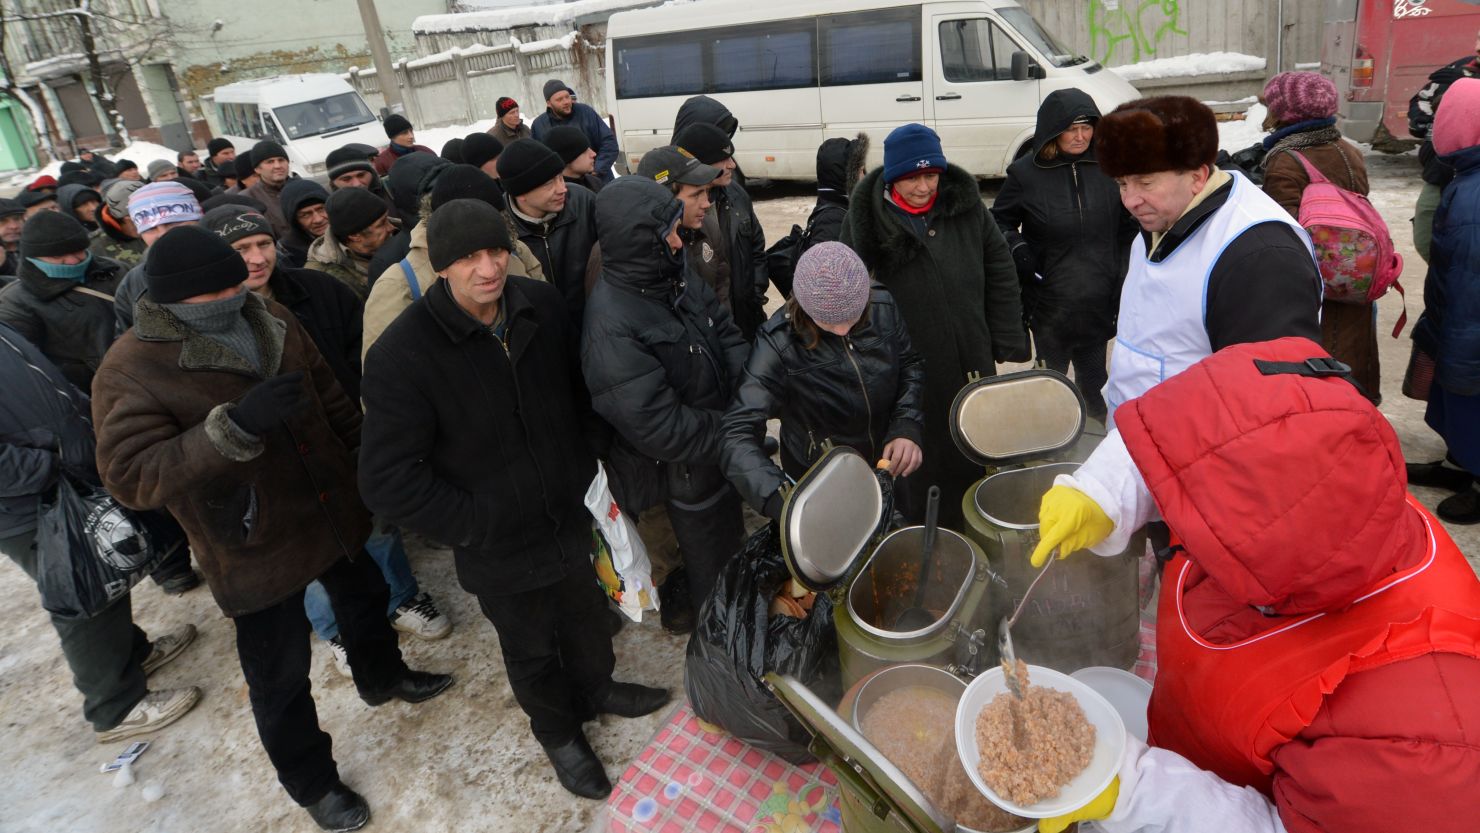 Homeless people queue to get free hot food in Kiev this week as a cold snap claims many lives.